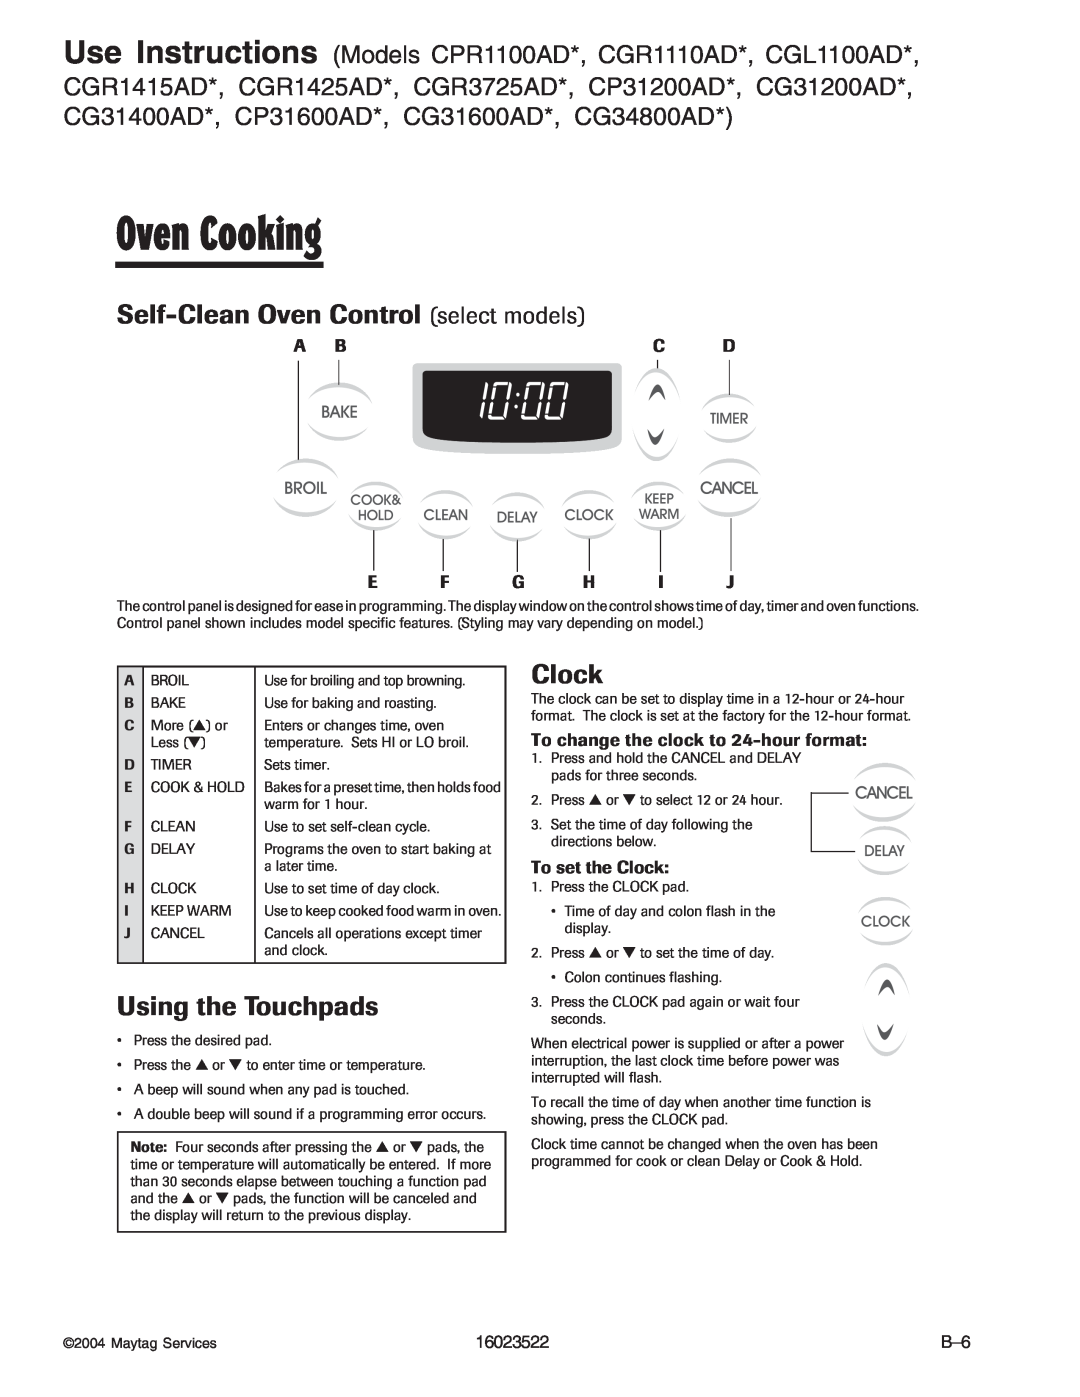 Maytag CGR1125ADQ/W Self-Clean Oven Control select models, A Bc D E F G H I J, To set the Clock, Oven Cooking, cont 